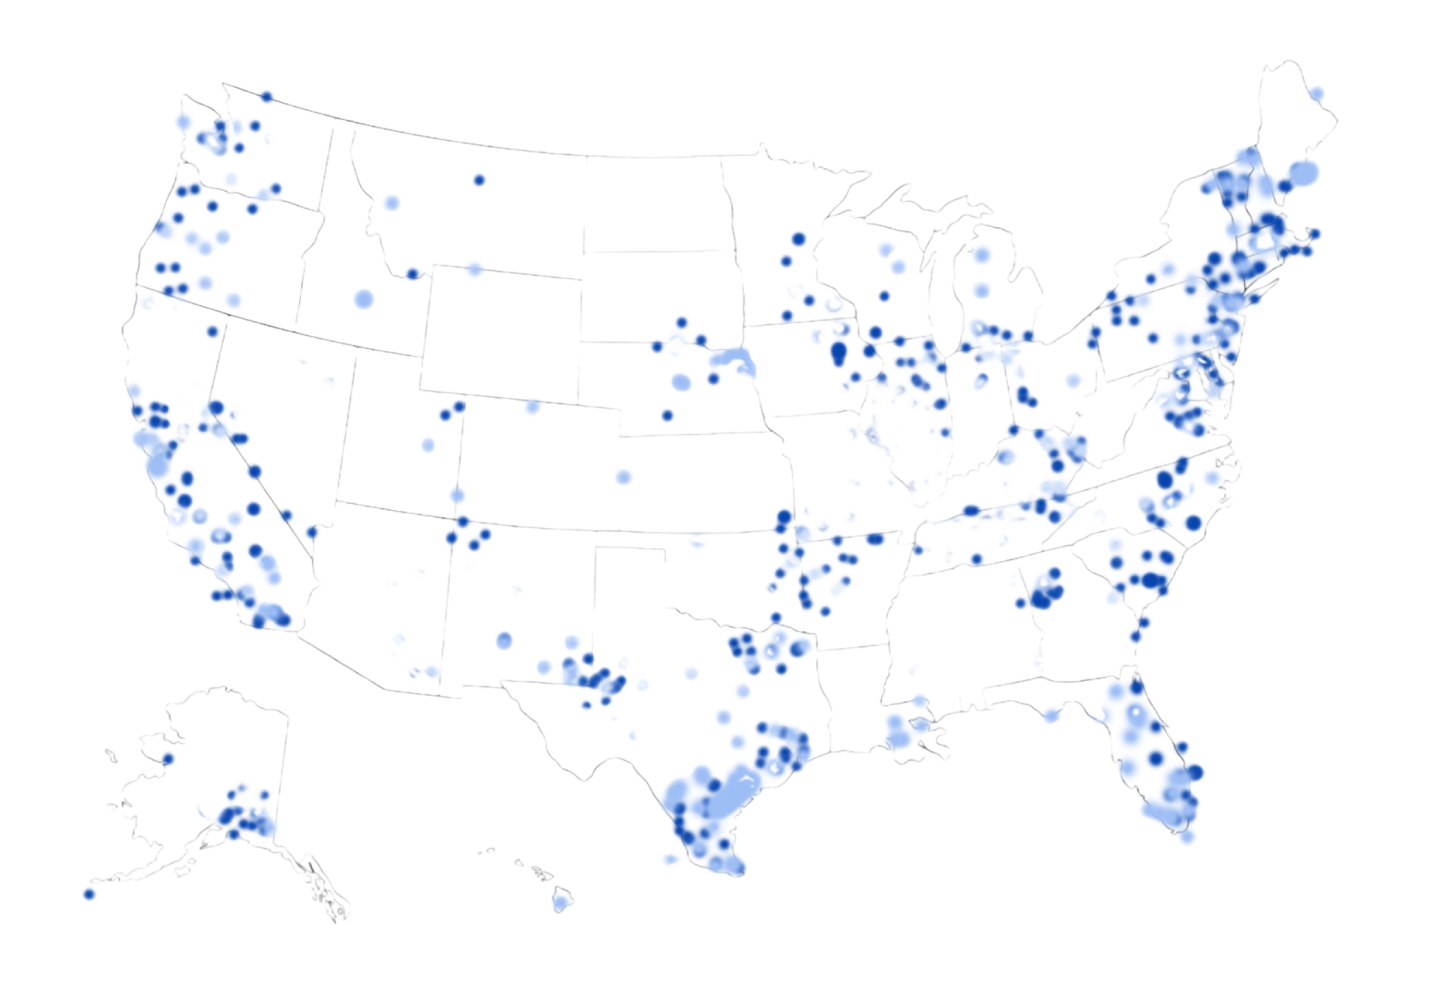 Map of U.S. with blue dots.